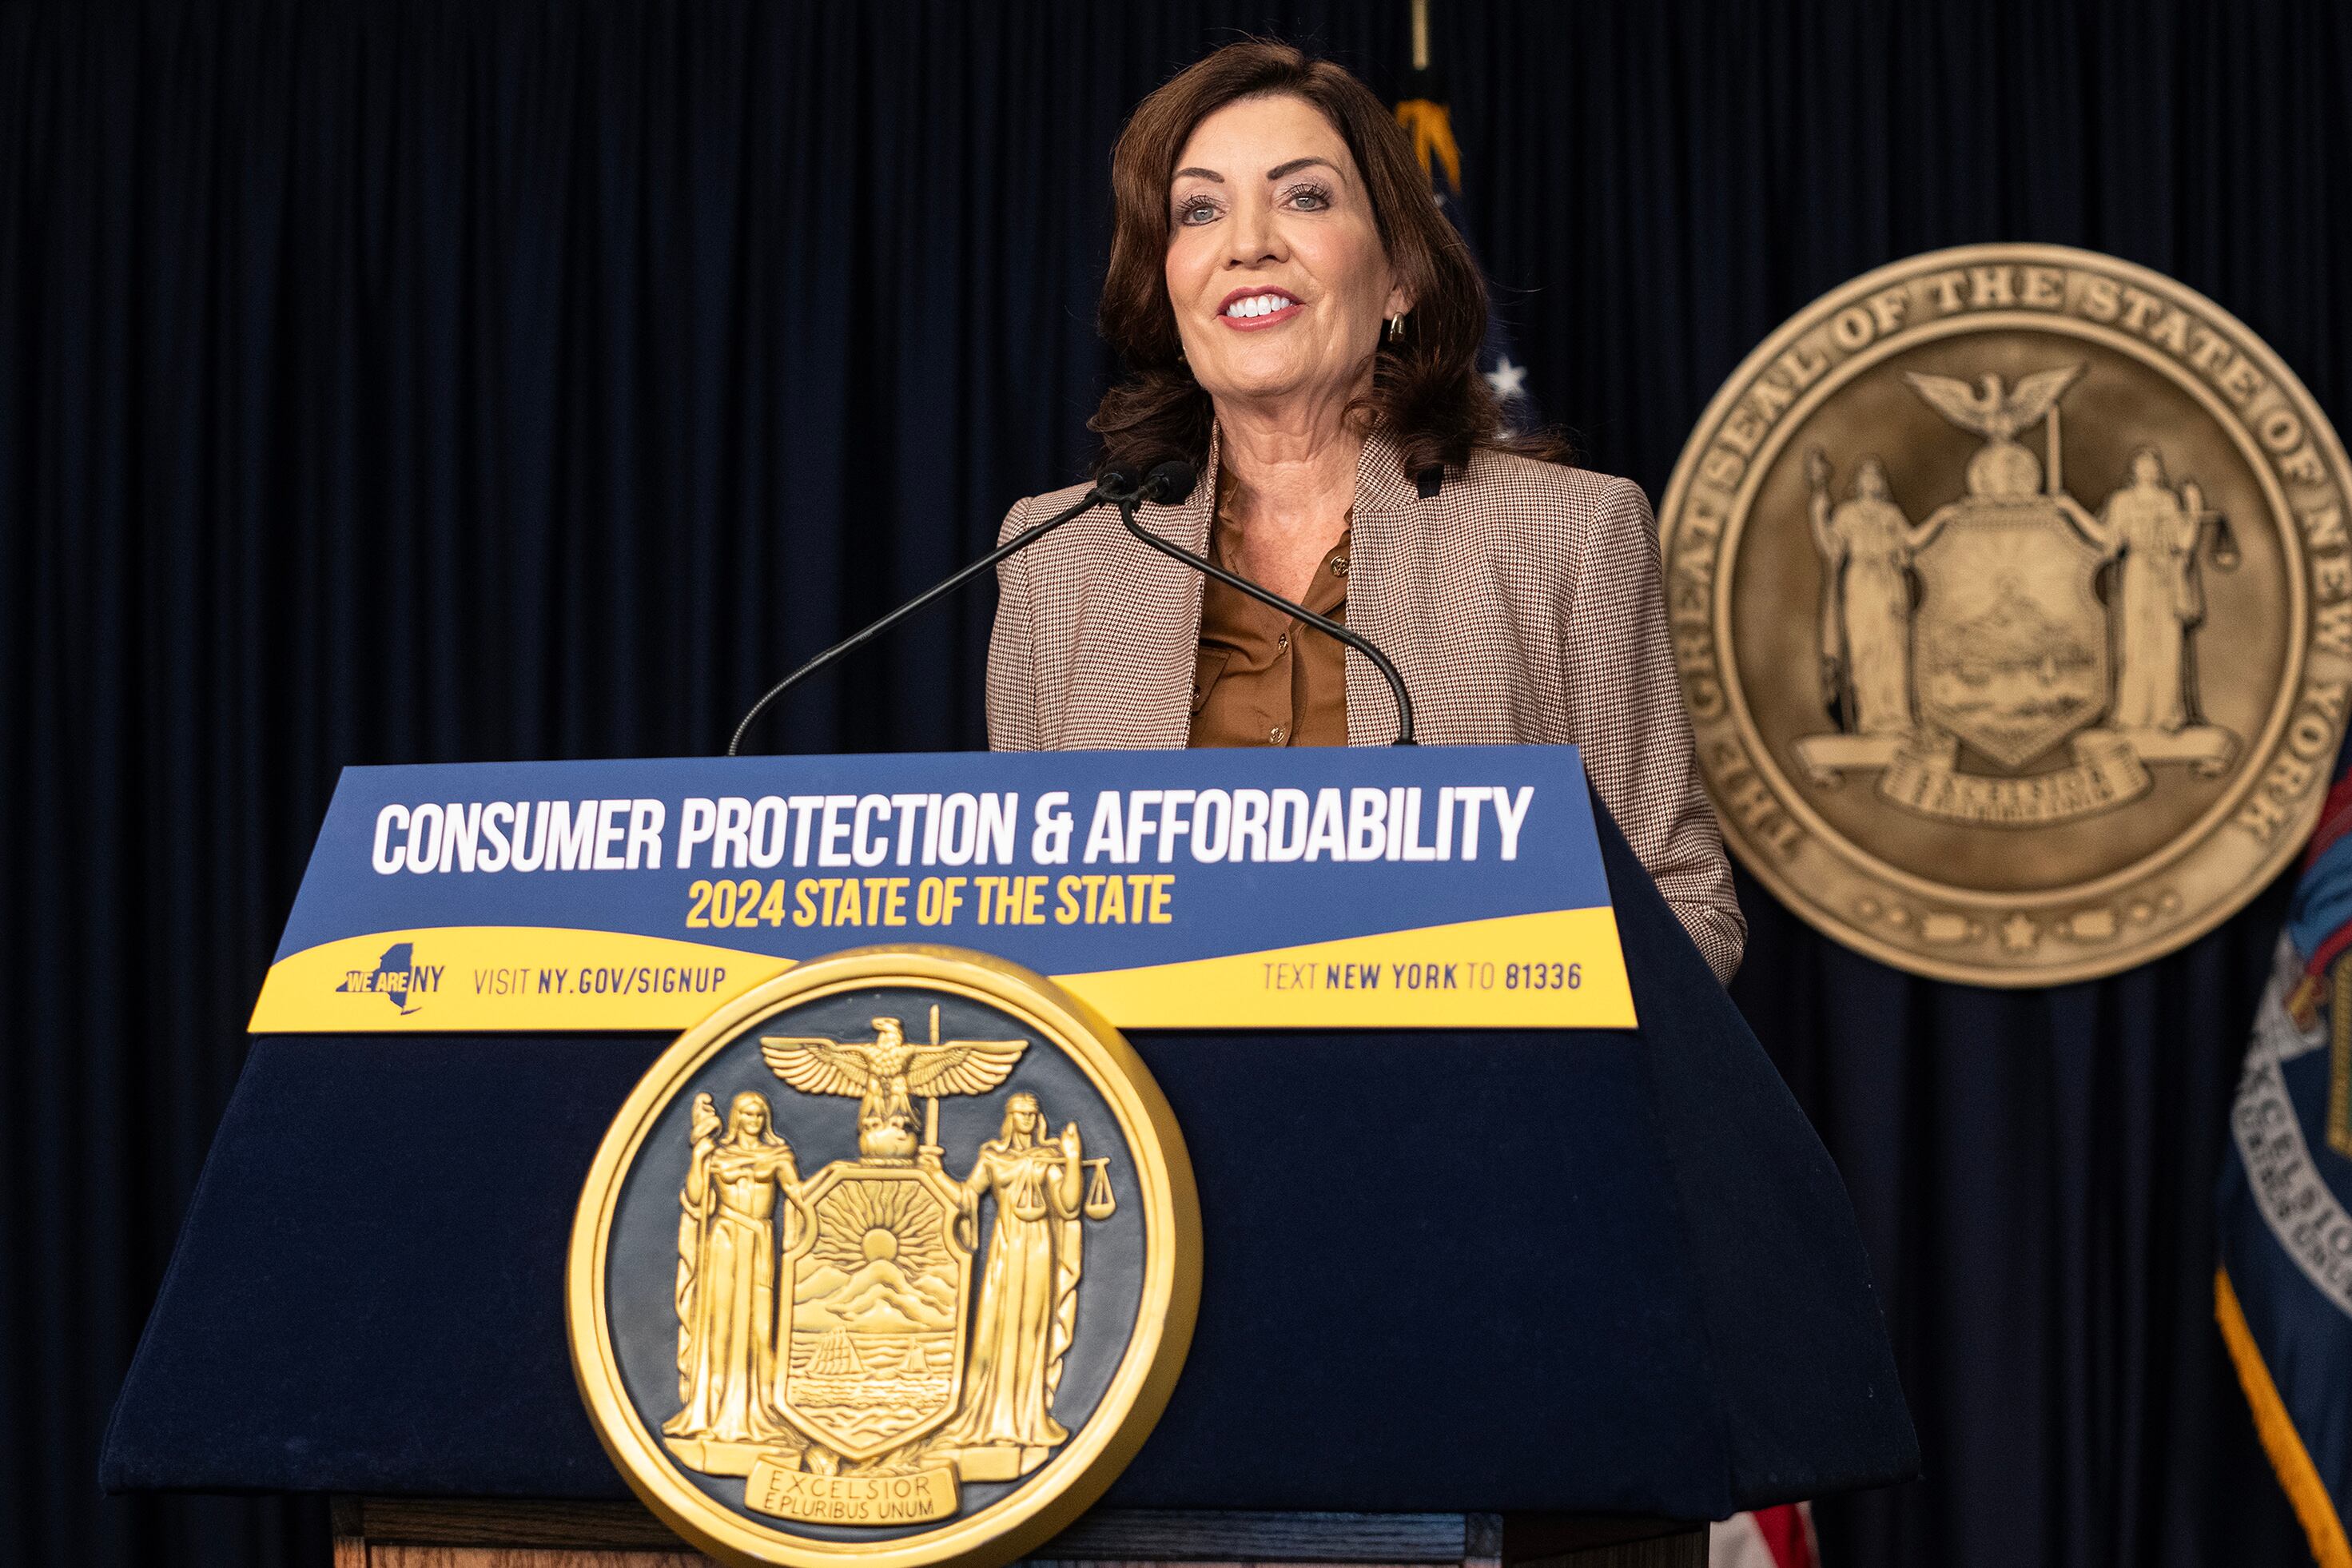 A woman with dark brown hair and wearing a light brown suit jacket stands behind a podium and speaks into a microphone. There is the New York State seal in the background and in the foreground.